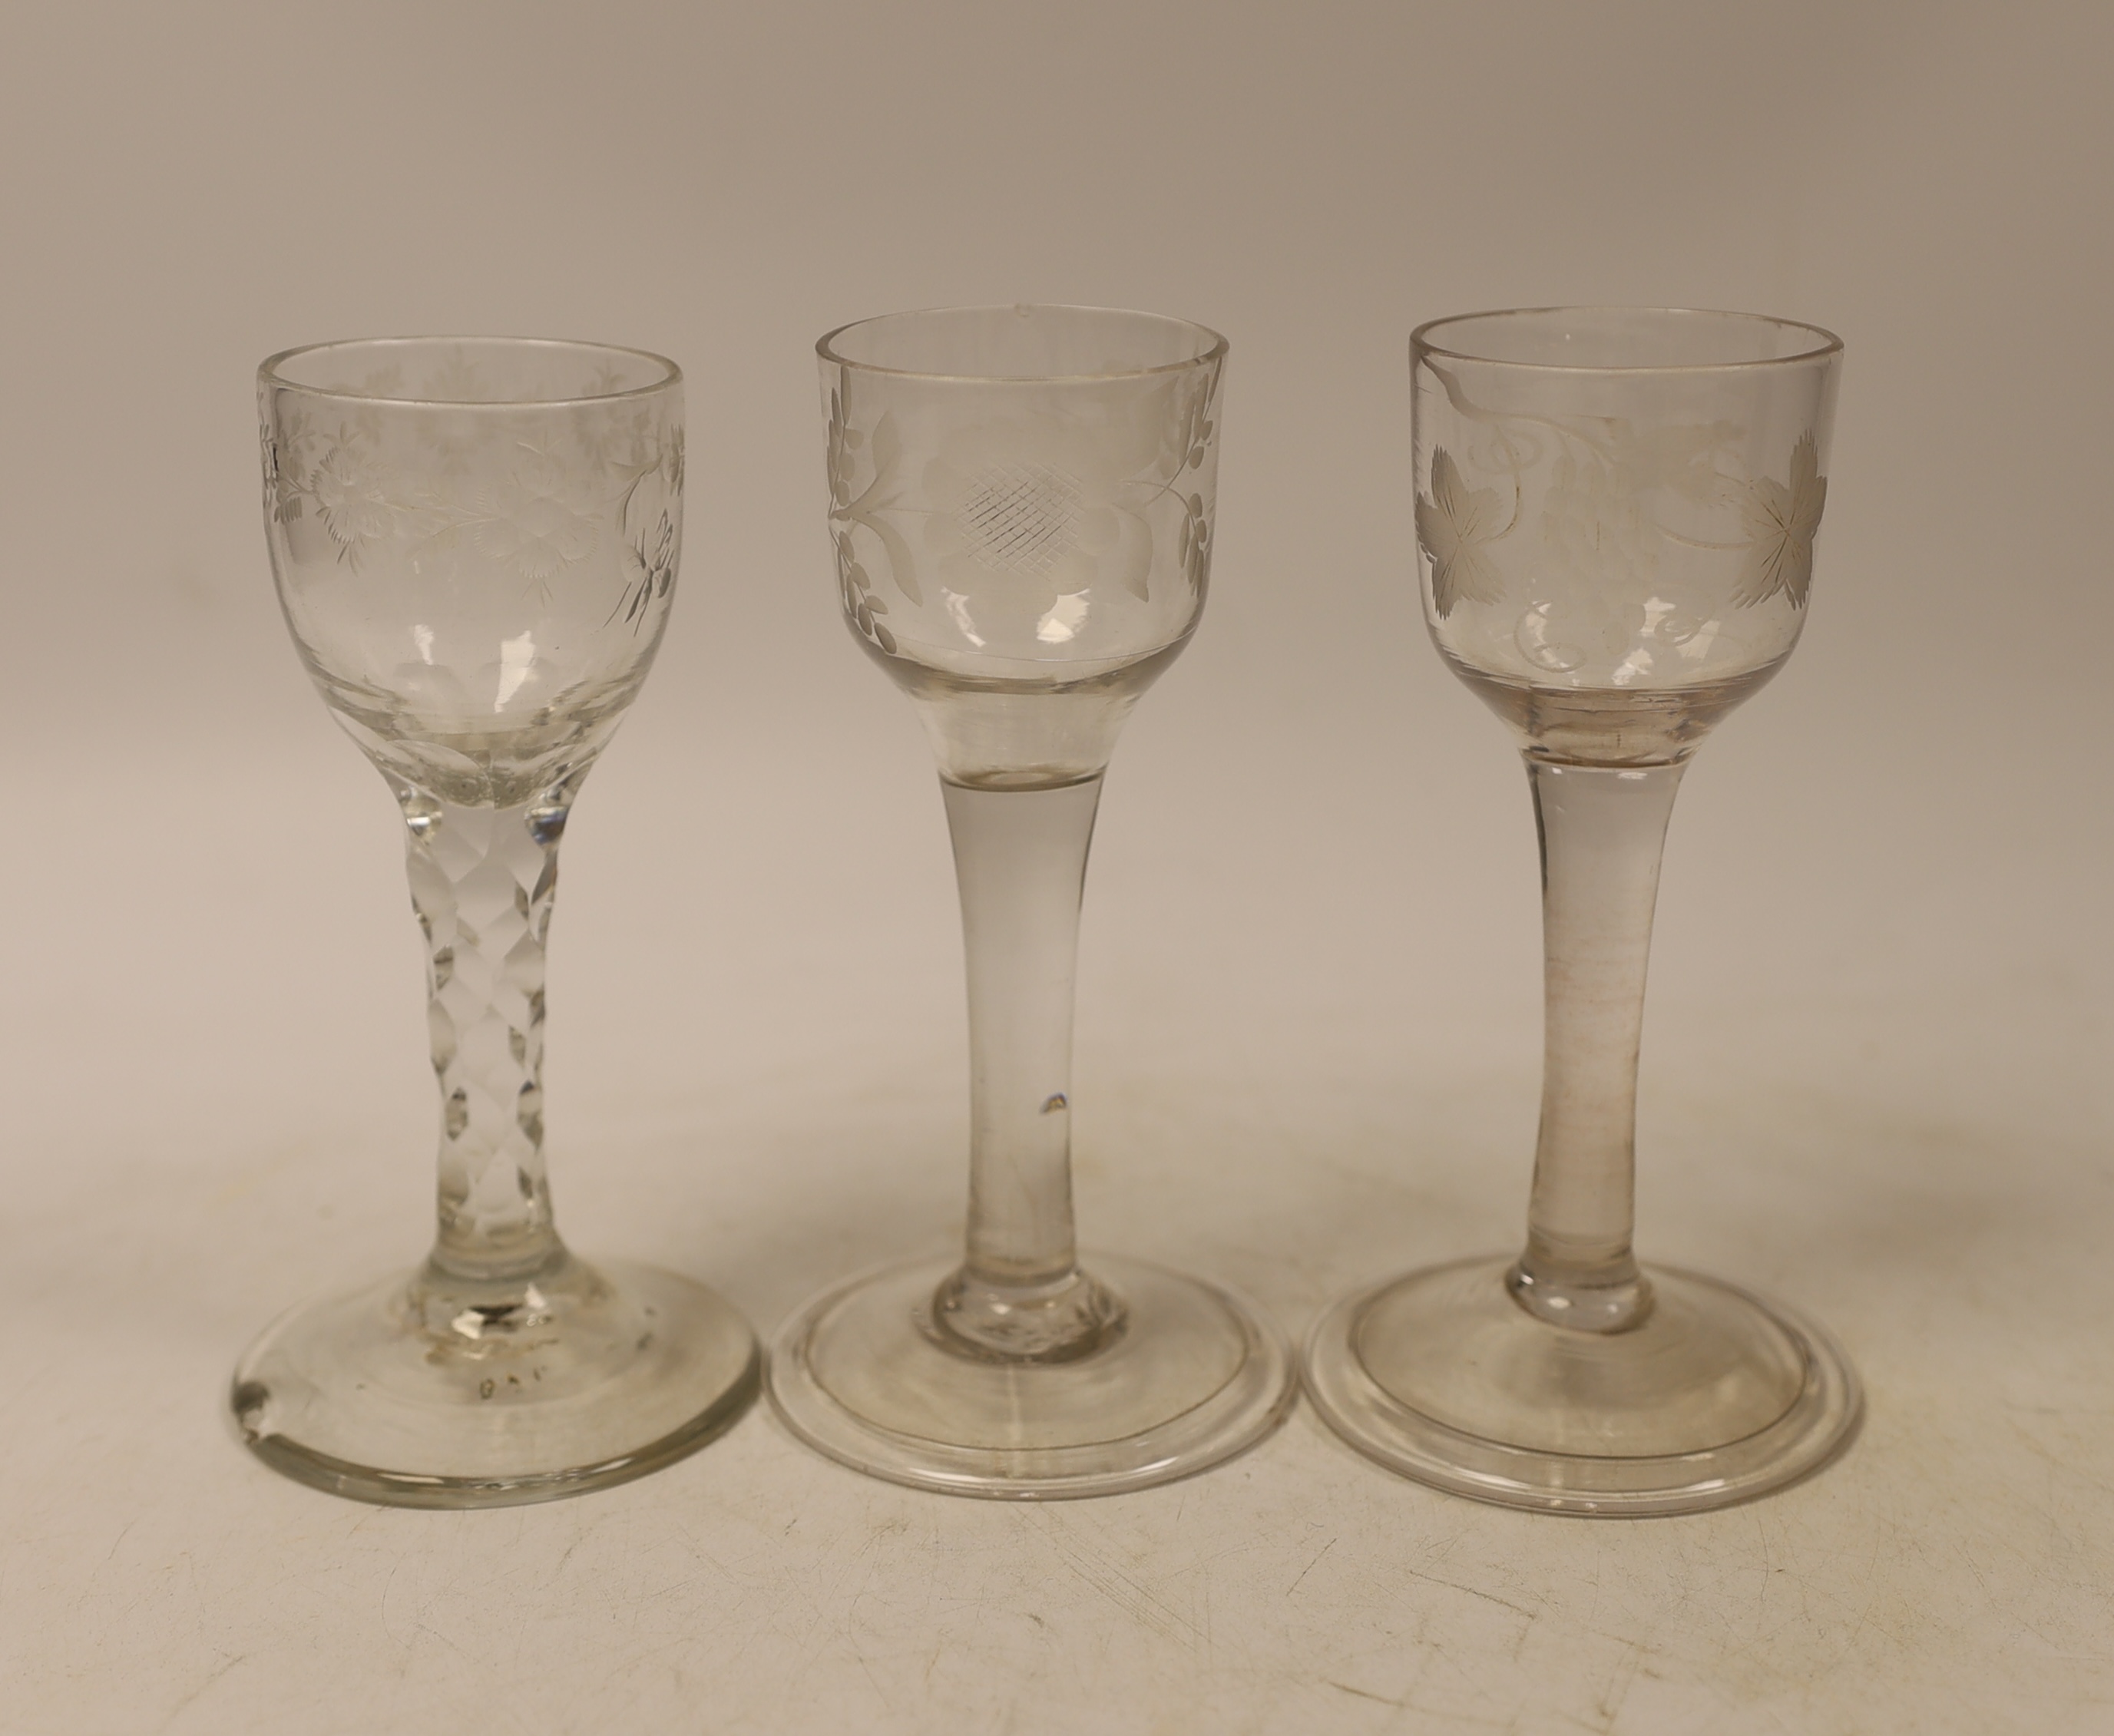 Two mid-18th century cordial glasses, each with wheel engraved decoration to the bowl, on a folded foot, together with a facet stem glass with engraved bowl, c.1780, tallest 13.5cm (3)